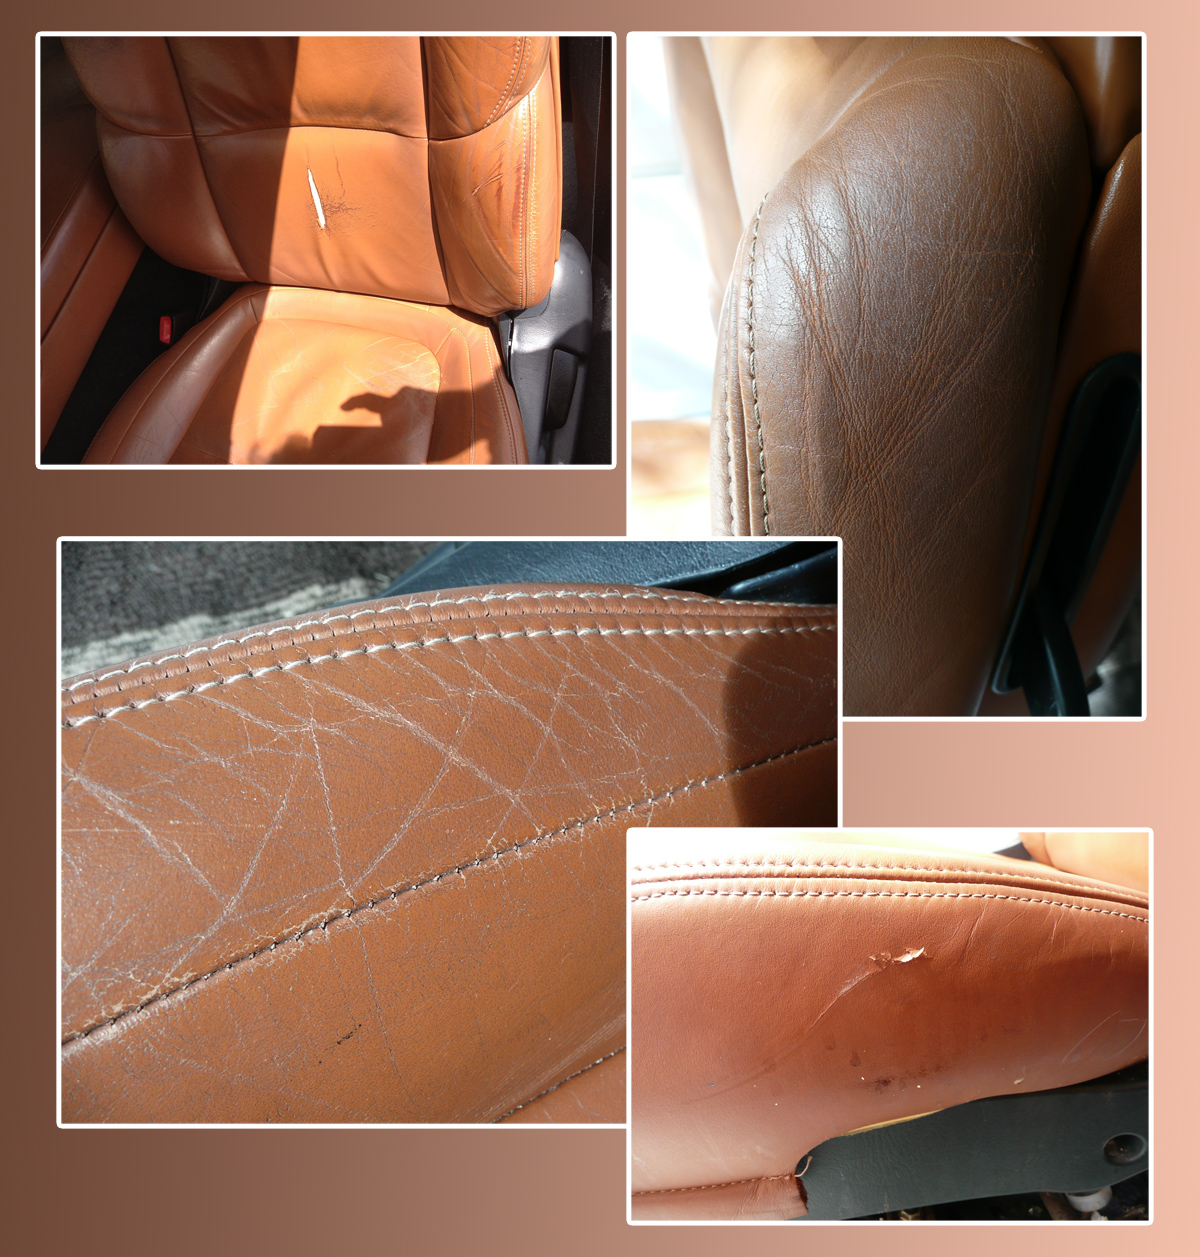 Driver's seat leather cracking?